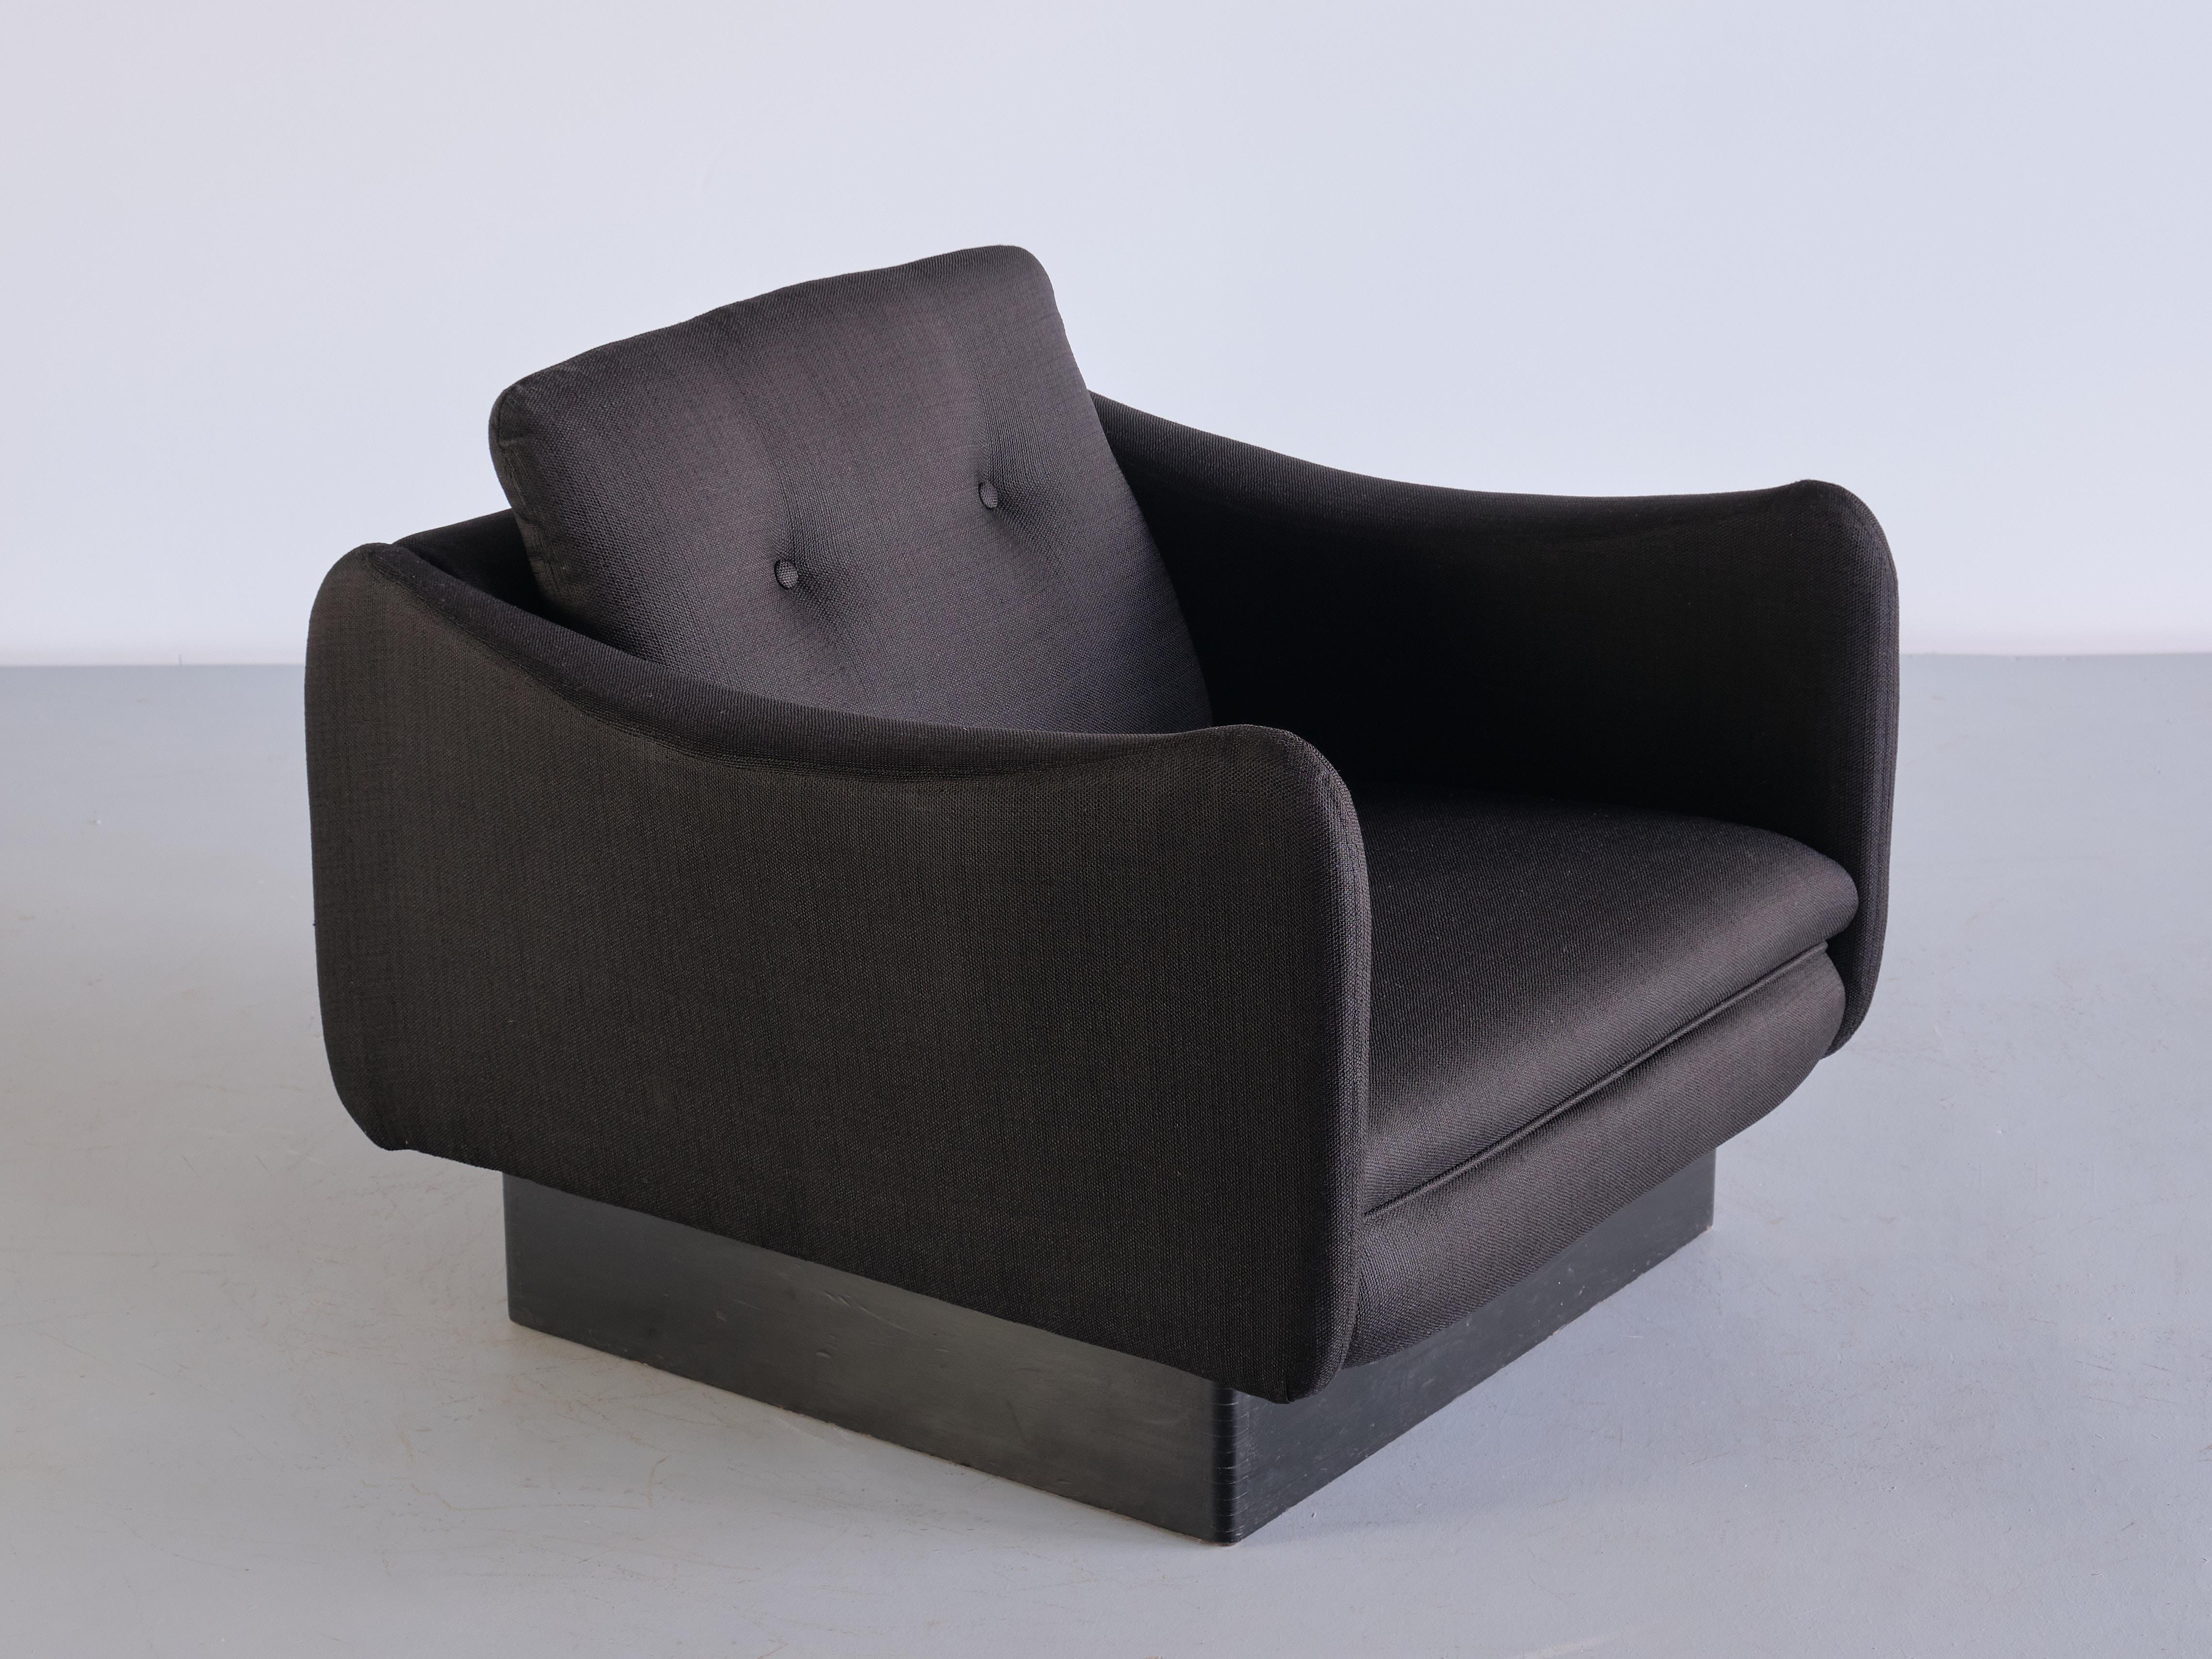 French Michel Mortier 'Teckel' Lounge Chair in Black Wool & Wood, Steiner, France, 1963 For Sale